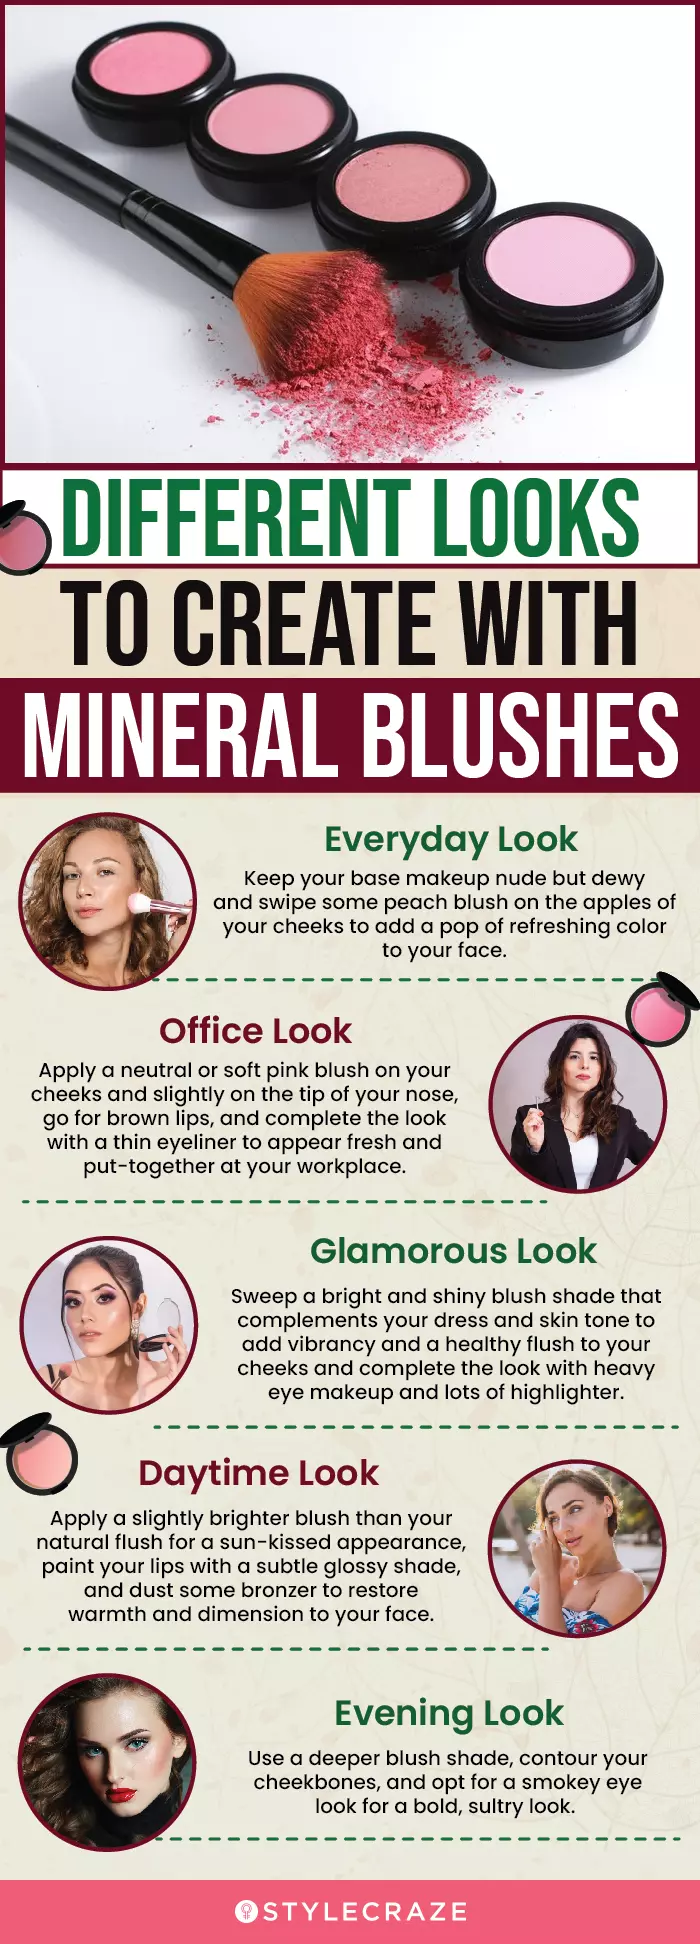 Different Looks To Create With Mineral Blushes(infographic)